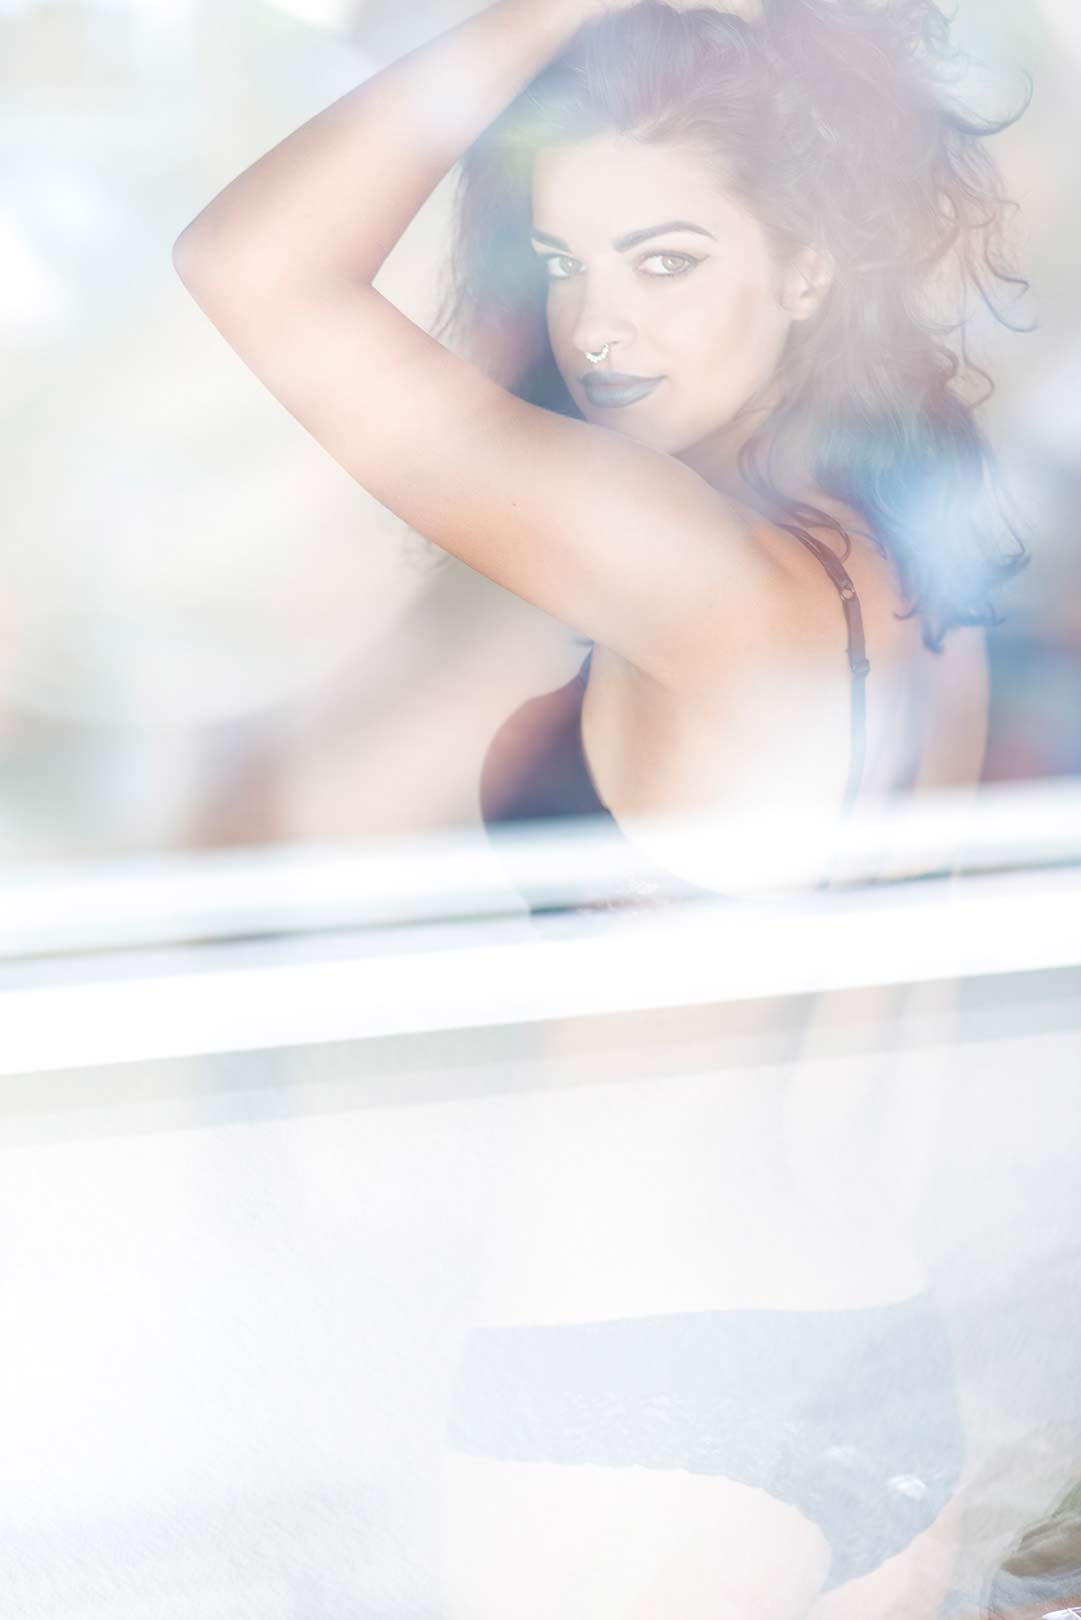 hot girl jessy in dessous through the window. erotic shooting munich